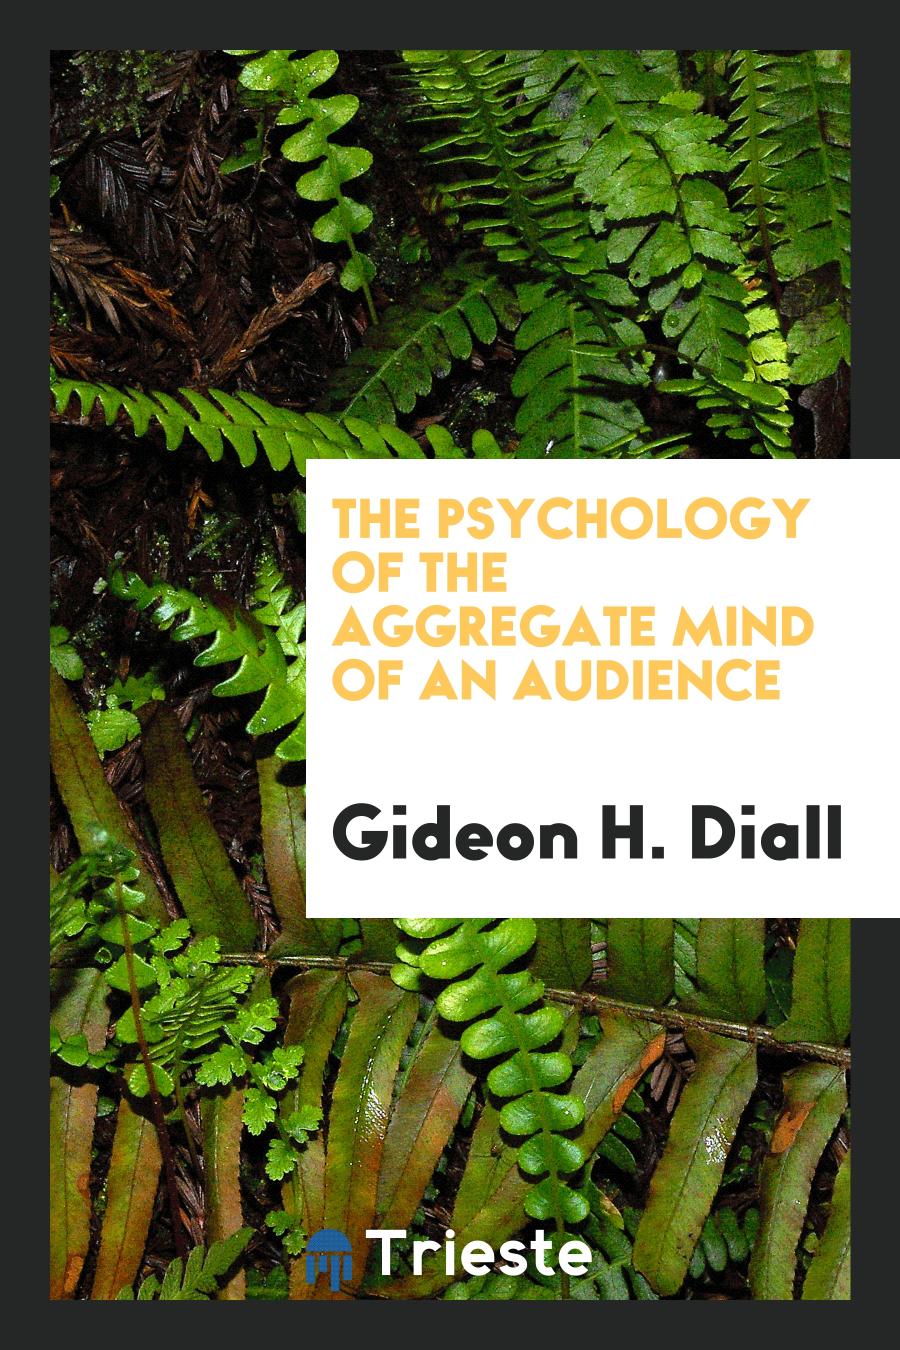 The Psychology of the Aggregate Mind of an Audience